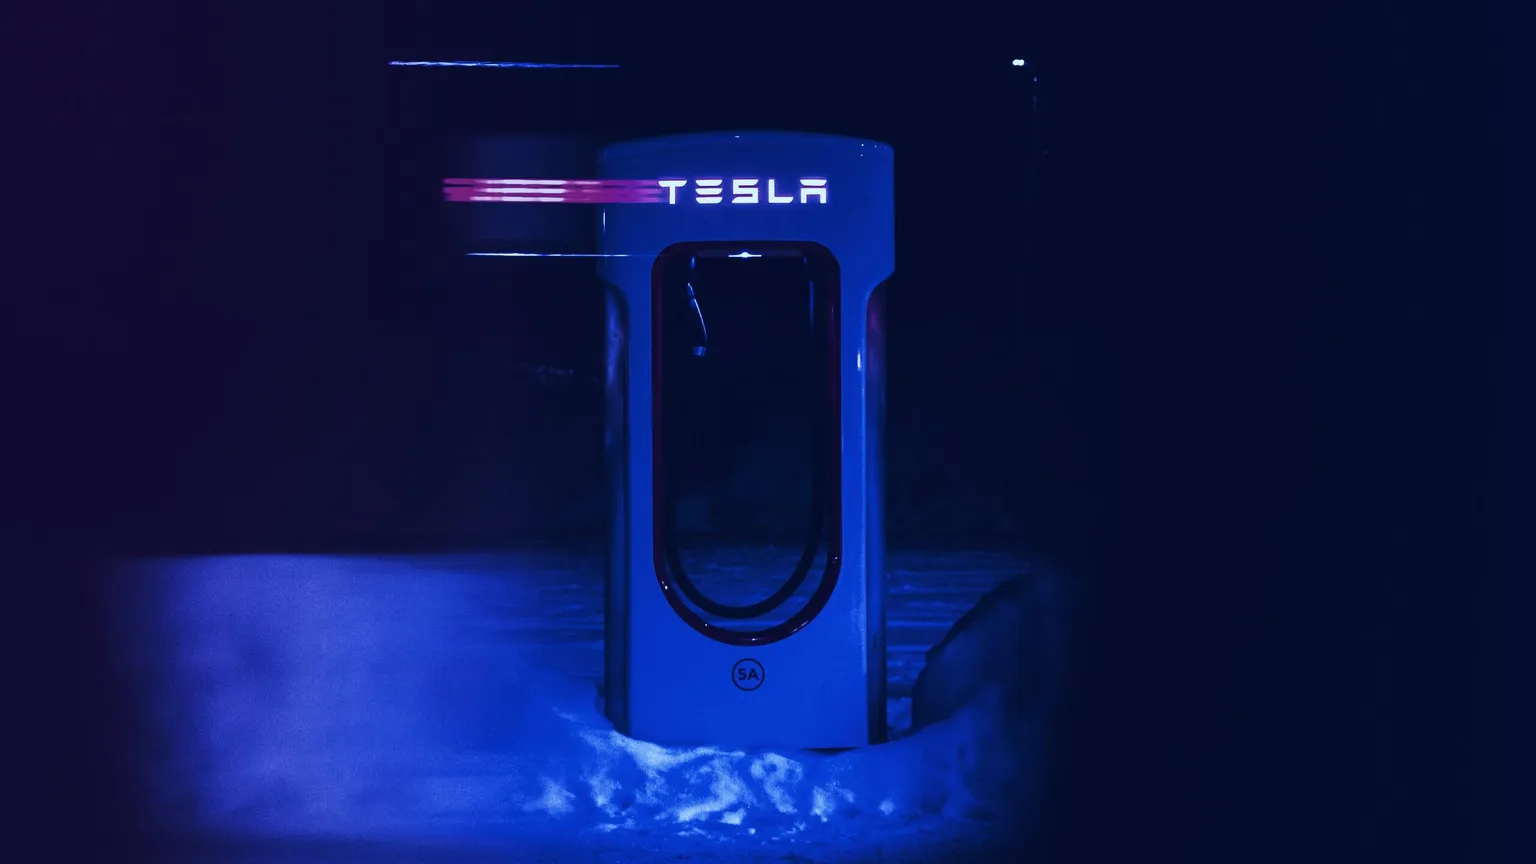 Bitcoin and Tesla are current favorites among US traders. Image: Unsplash